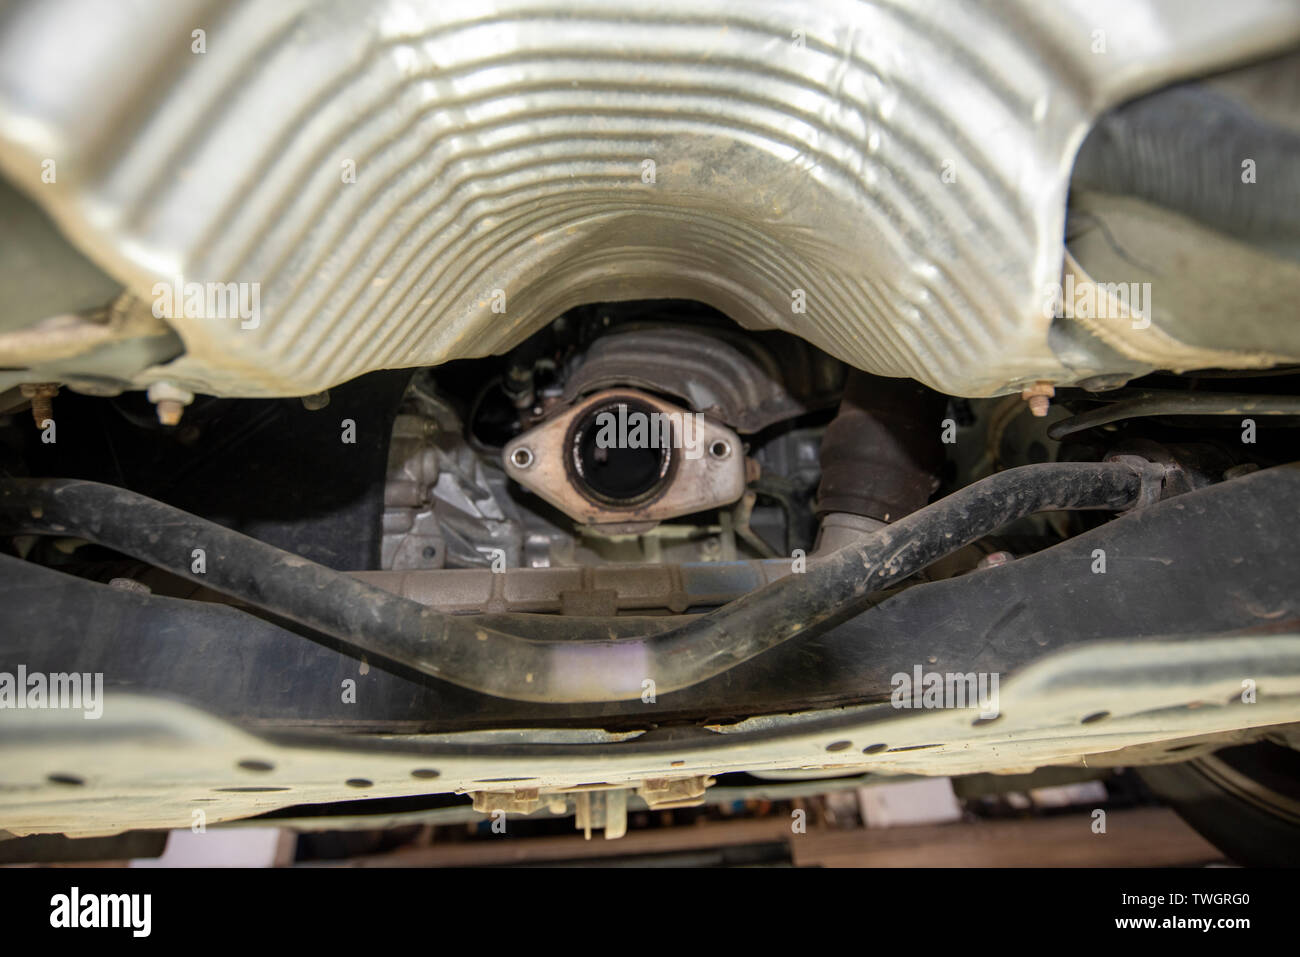 Toyota Prius, stolen Catalytic Converter. View underneath vehicle from a mechanics inspection pit, showing location of missing and damaged components. Stock Photo